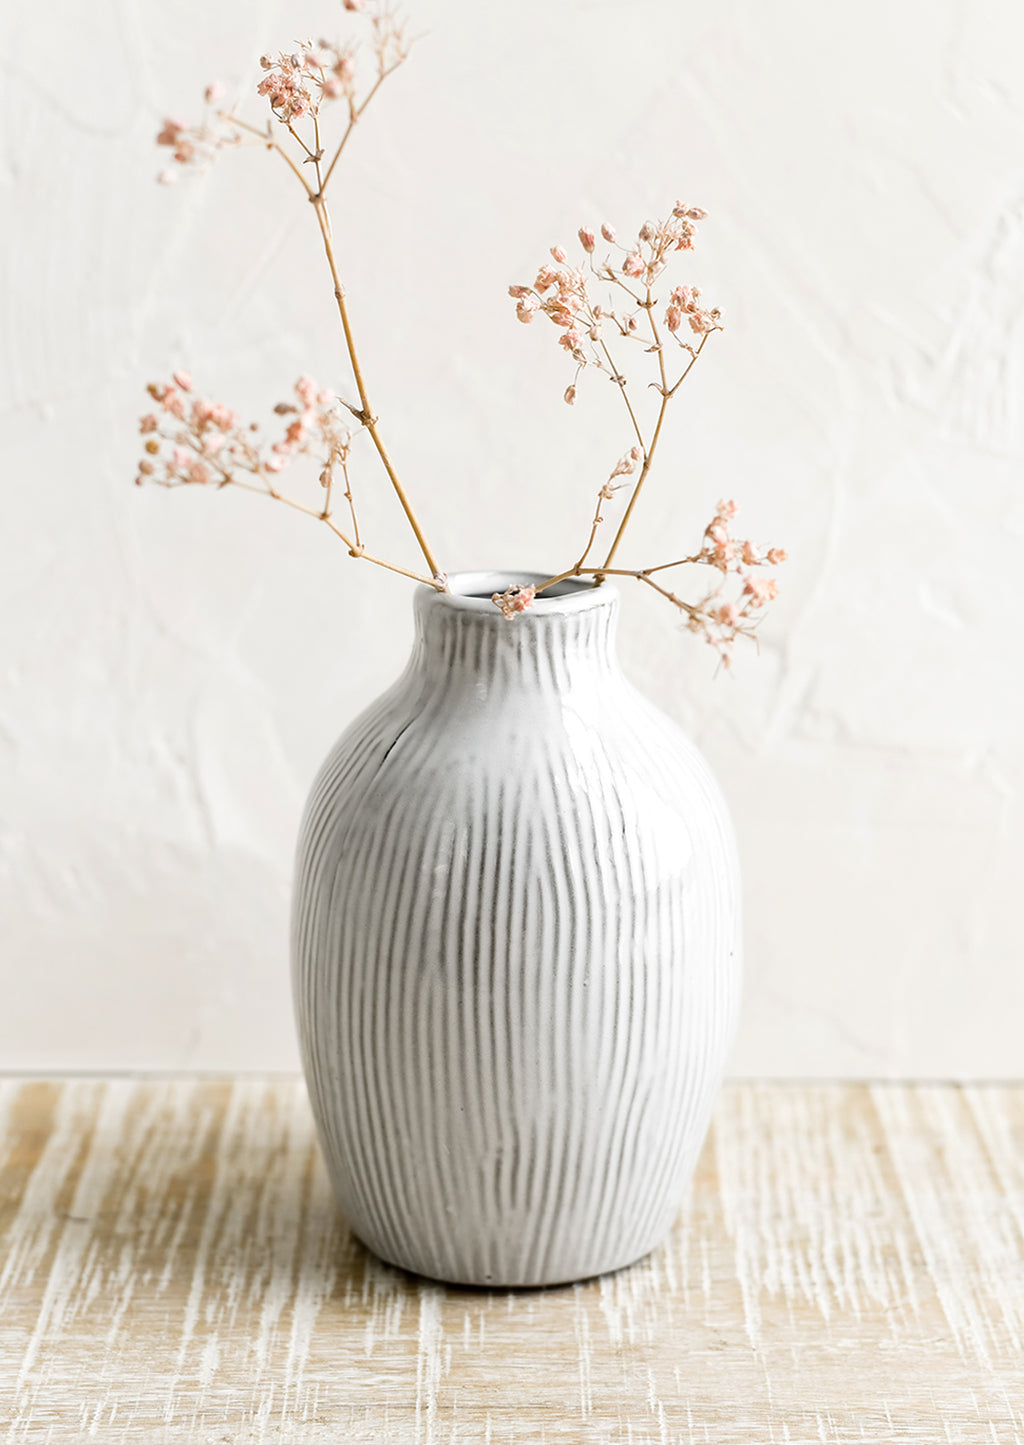 1: A curvy ceramic vase in white with brown etched stripes.